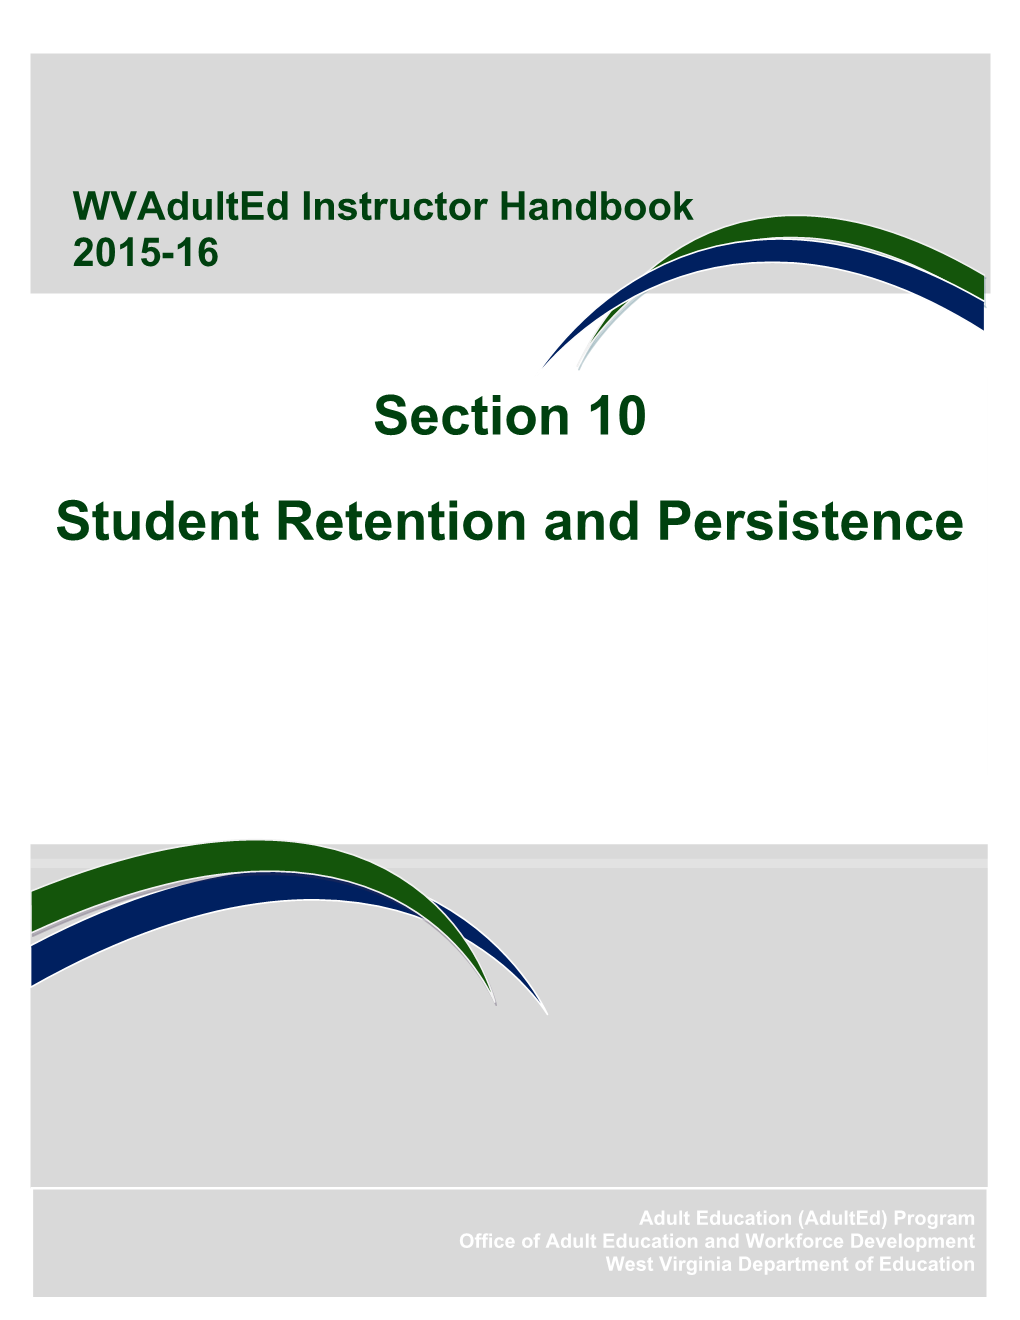 Student Retention and Persistence